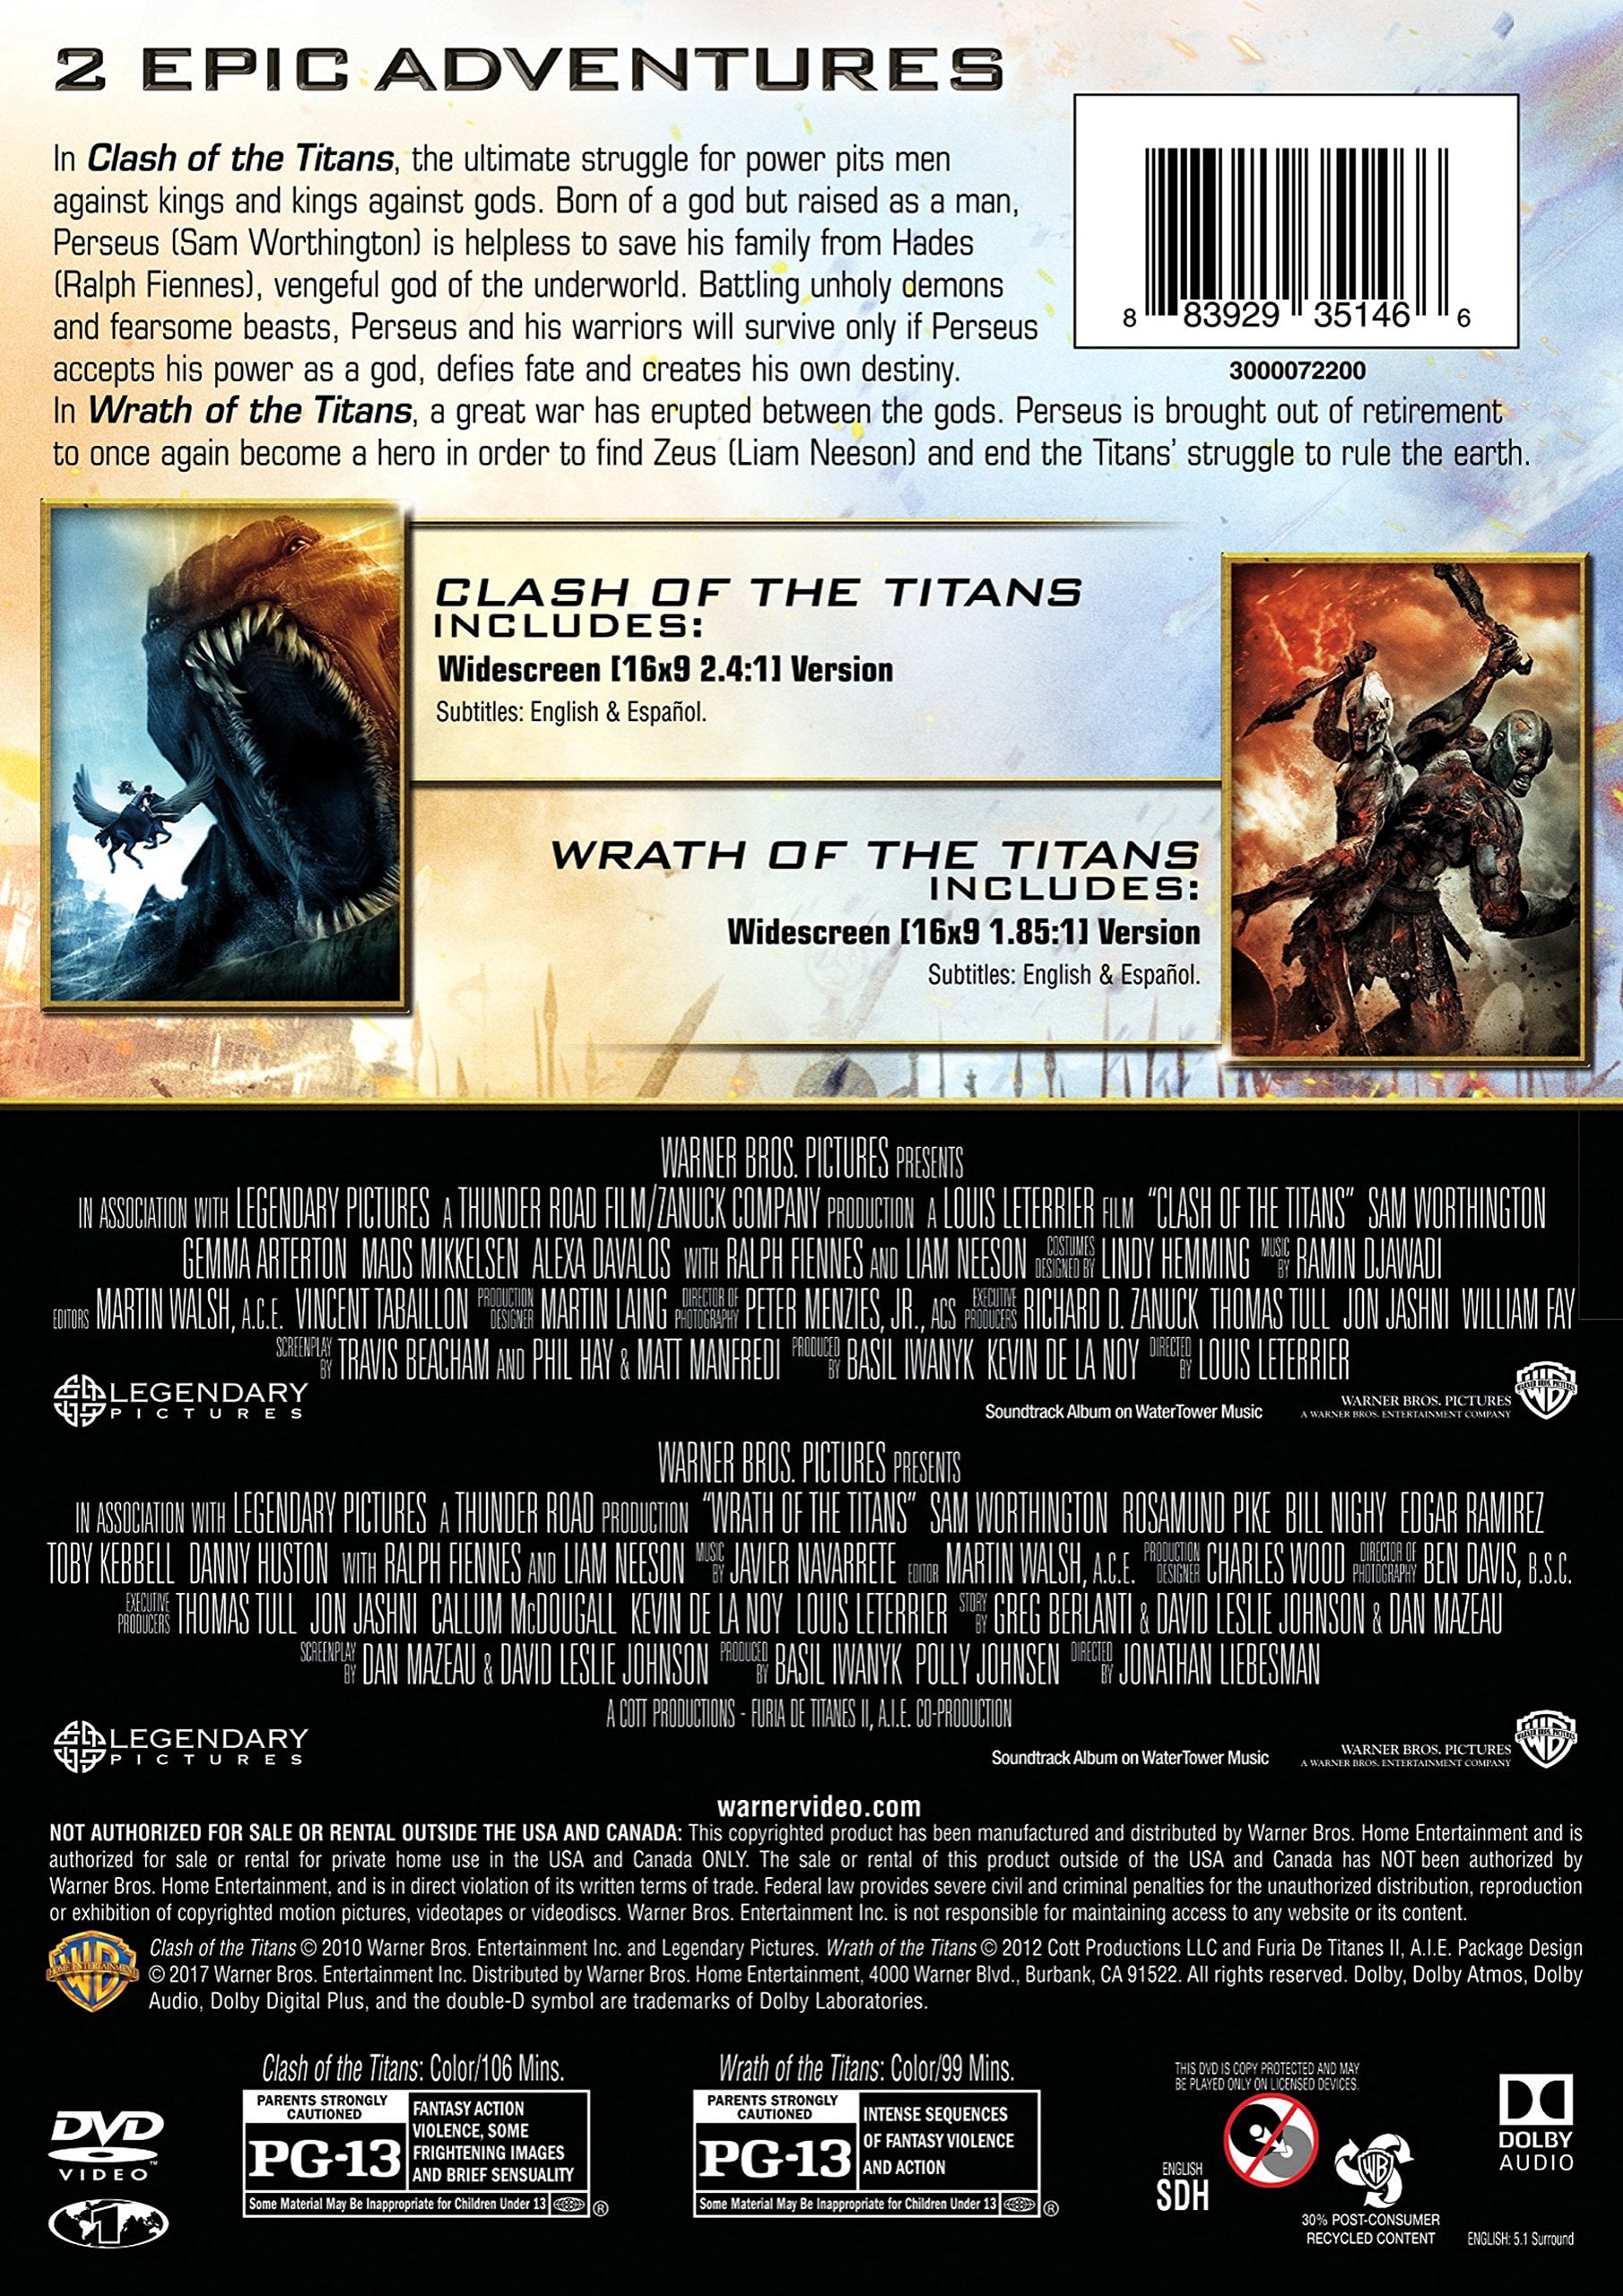 Warner Clash Of The Titans / Wrath Of The Titans (Widescreen